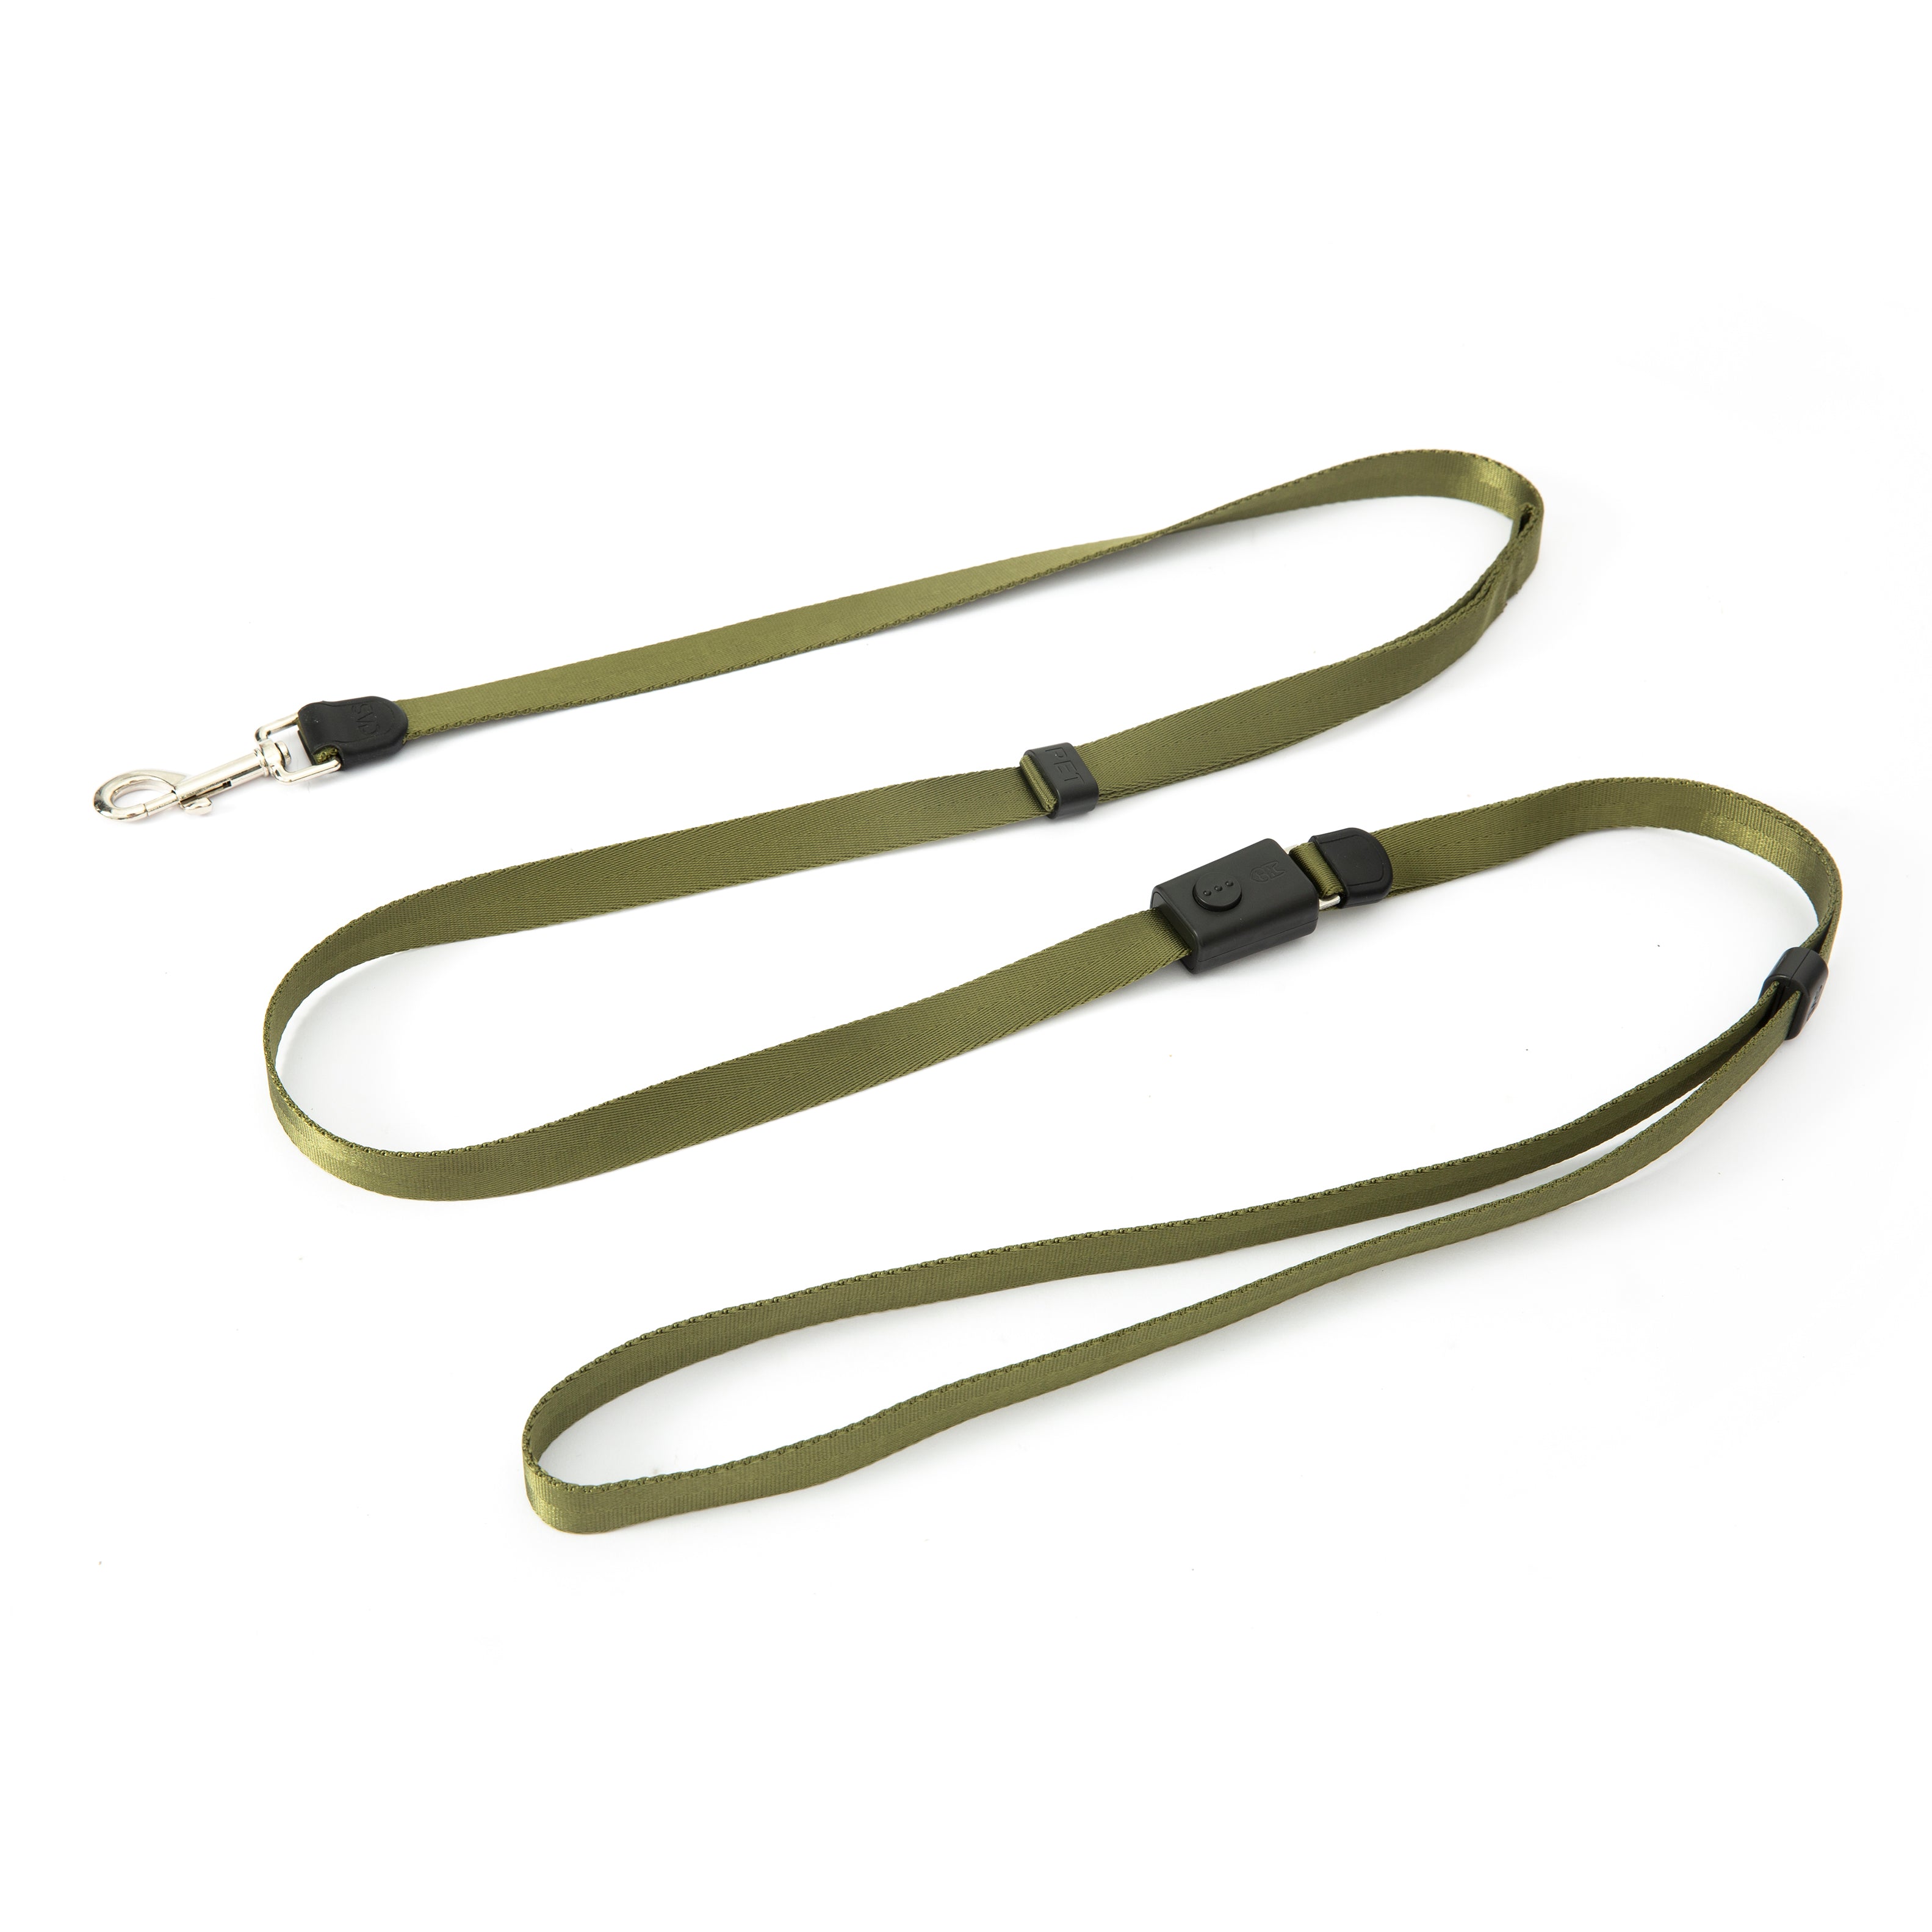 4-in-1 Hands-free Dog Leash